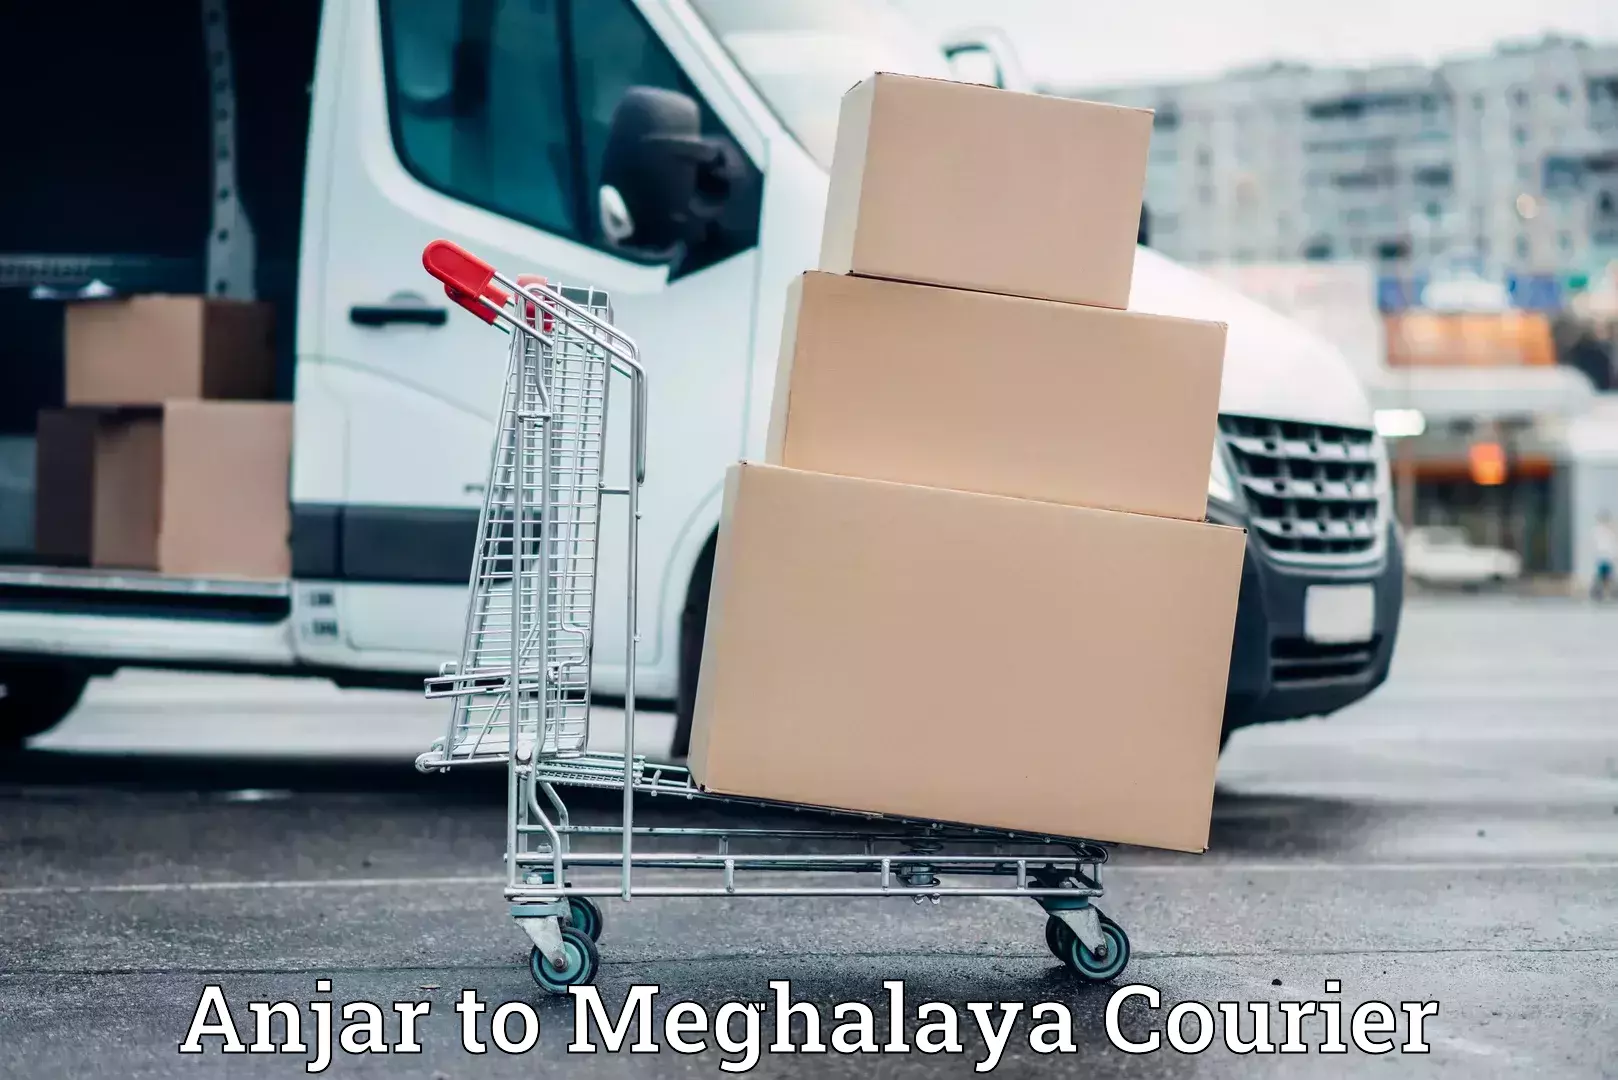 Trusted relocation experts Anjar to Meghalaya